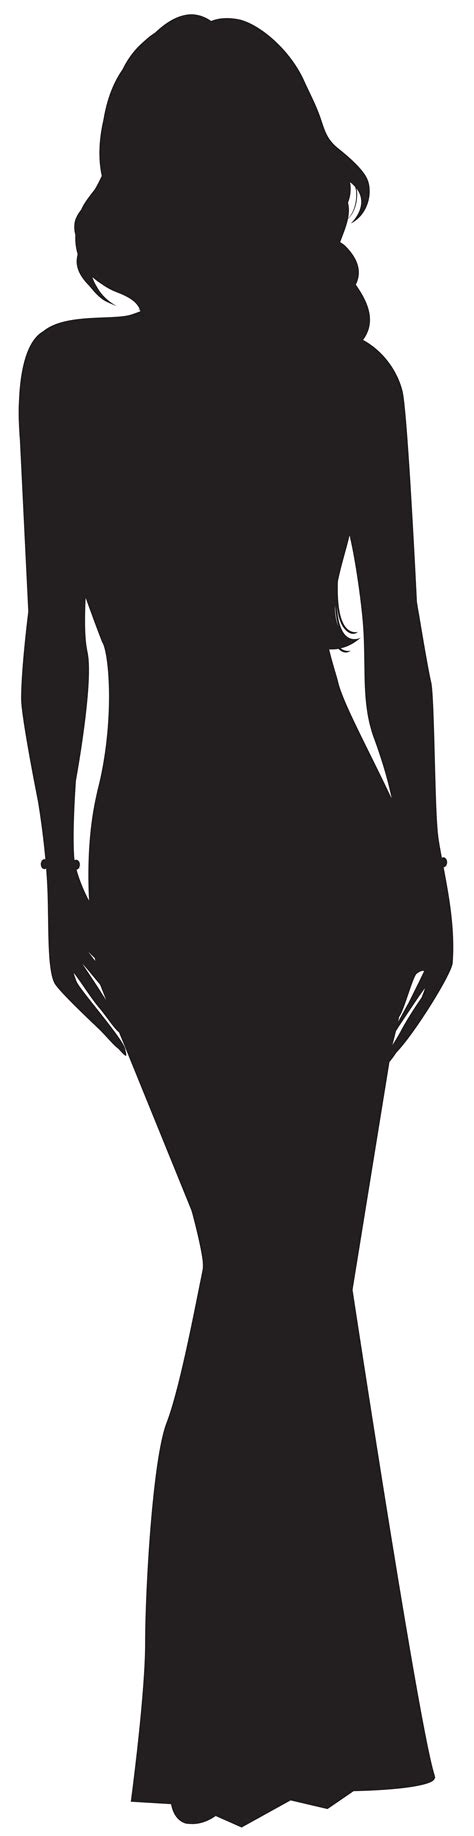 Woman Silhouette Png Clip Art Image Gallery Yopriceville High